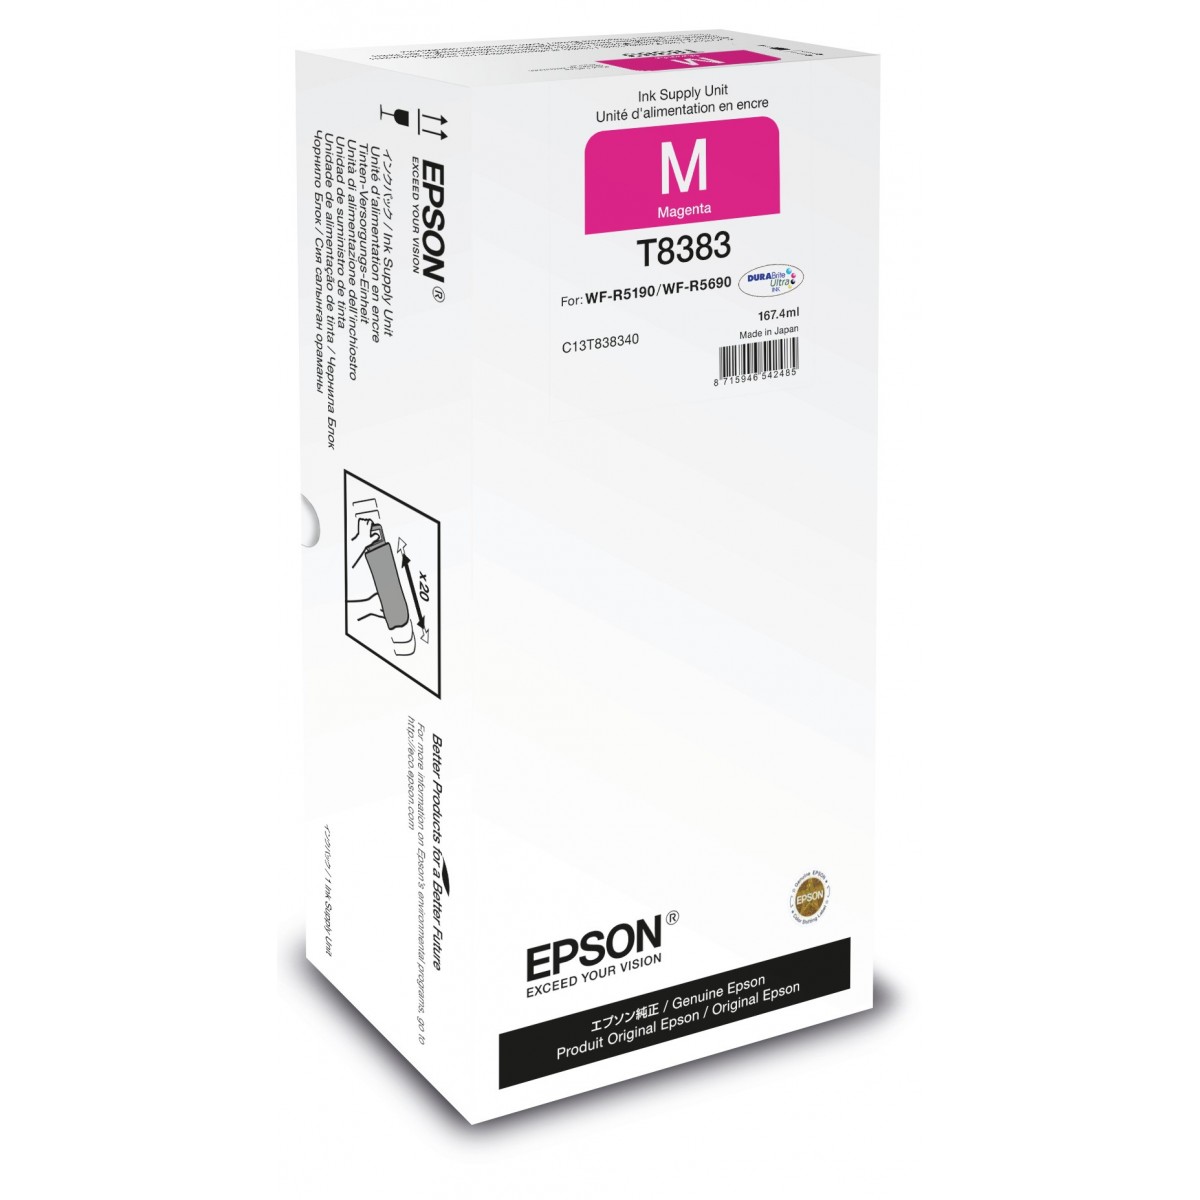 Epson Magenta XL Ink Supply Unit - Pigment-based ink - 1 pc(s)